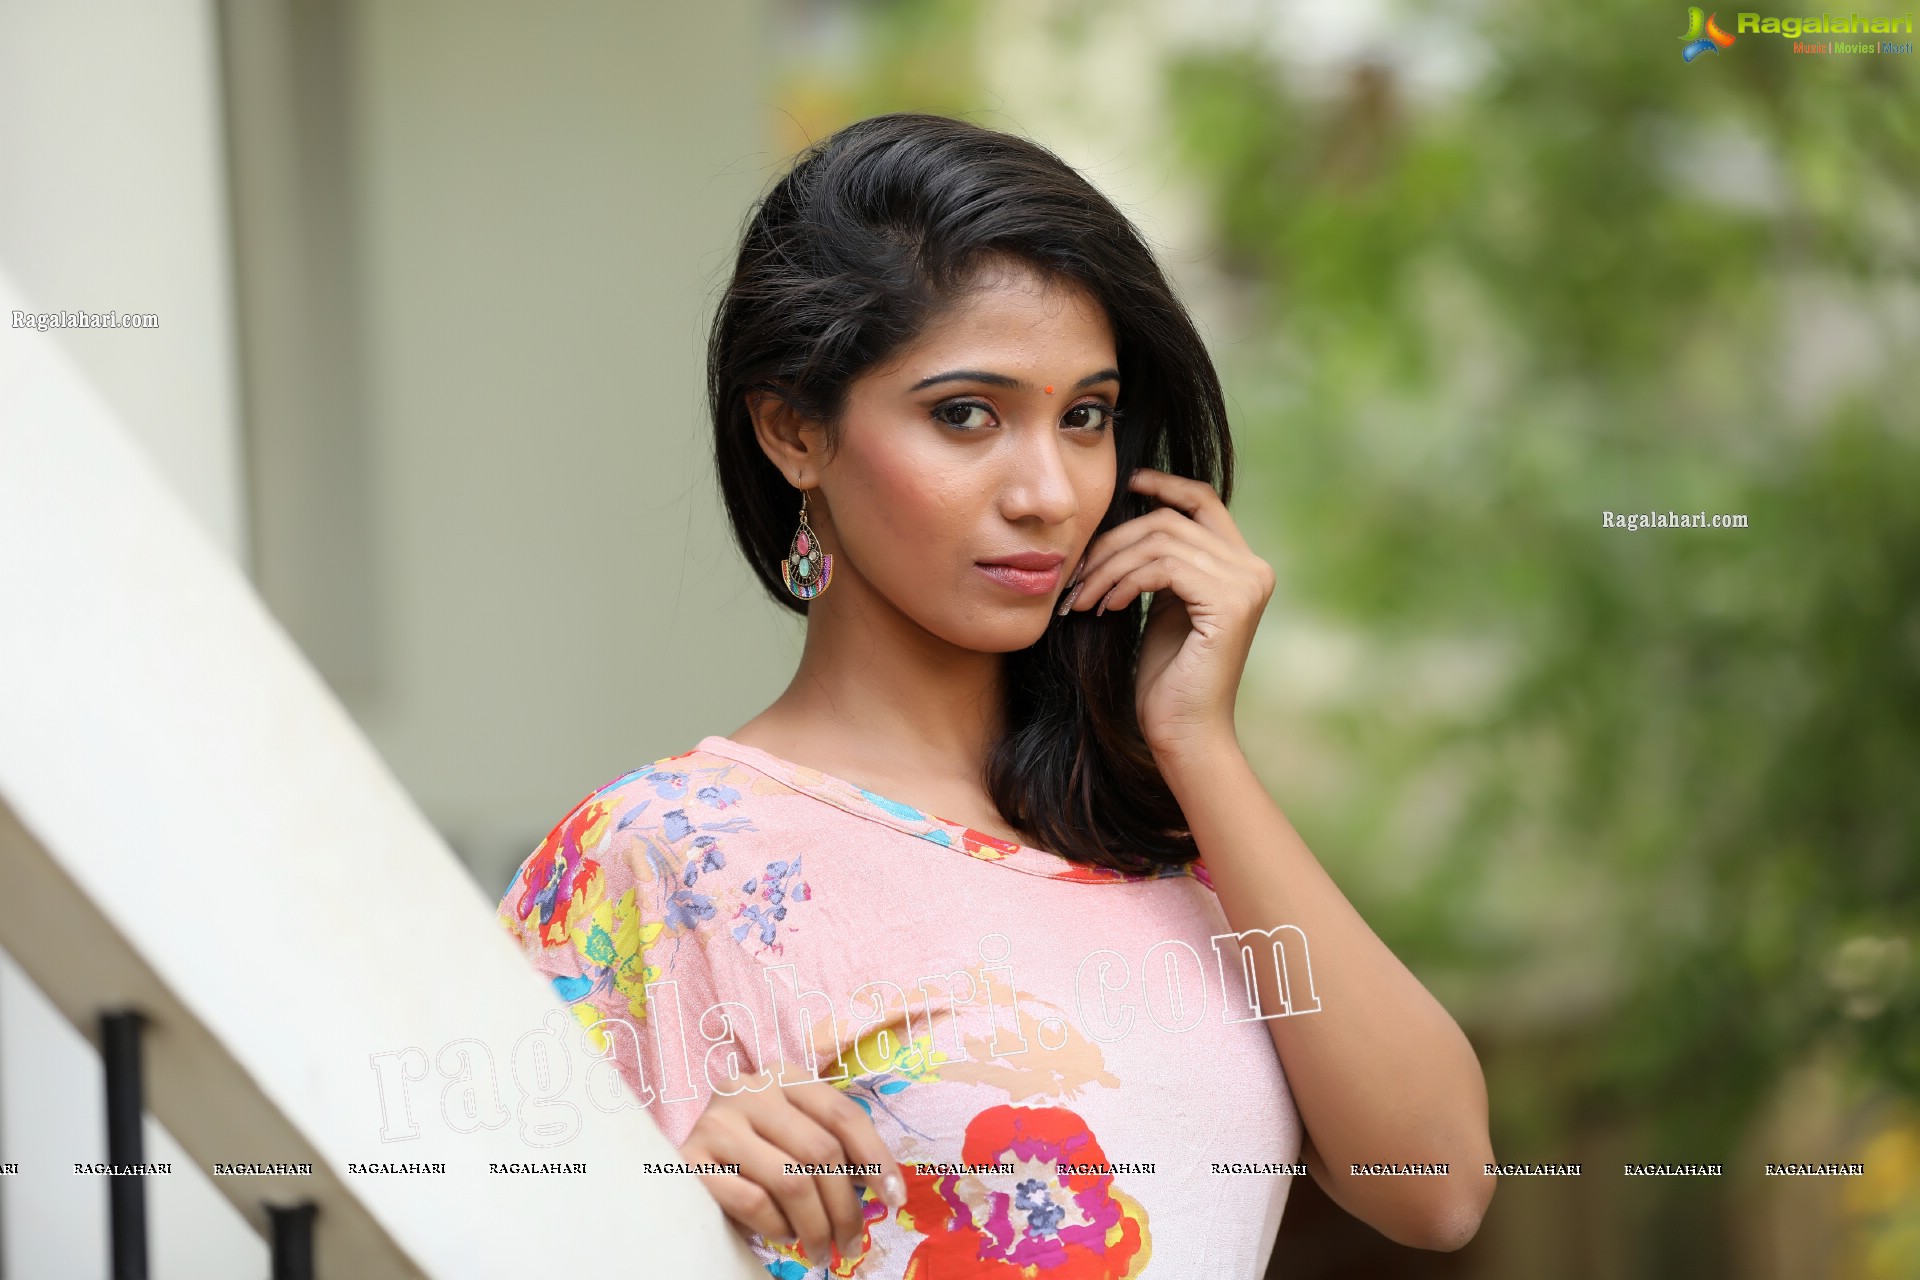 Swetha Mathi in One Shoulder Floral Top and Ruffled Skirt Exclusive Photo Shoot